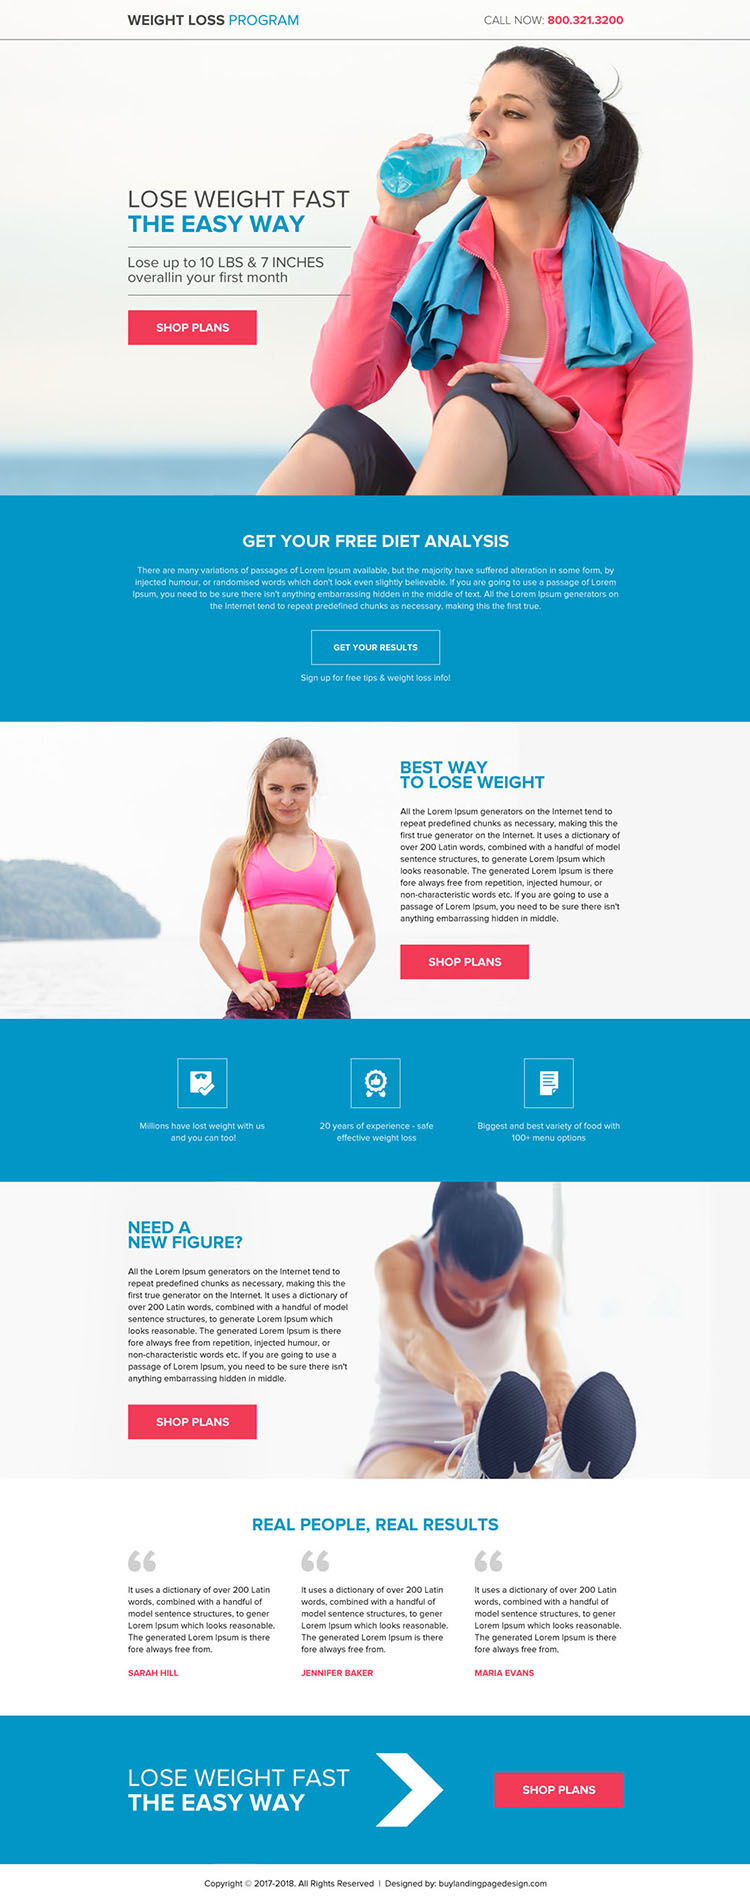 weight loss diet plans strong call to action lead capturing buttons responsive landing page